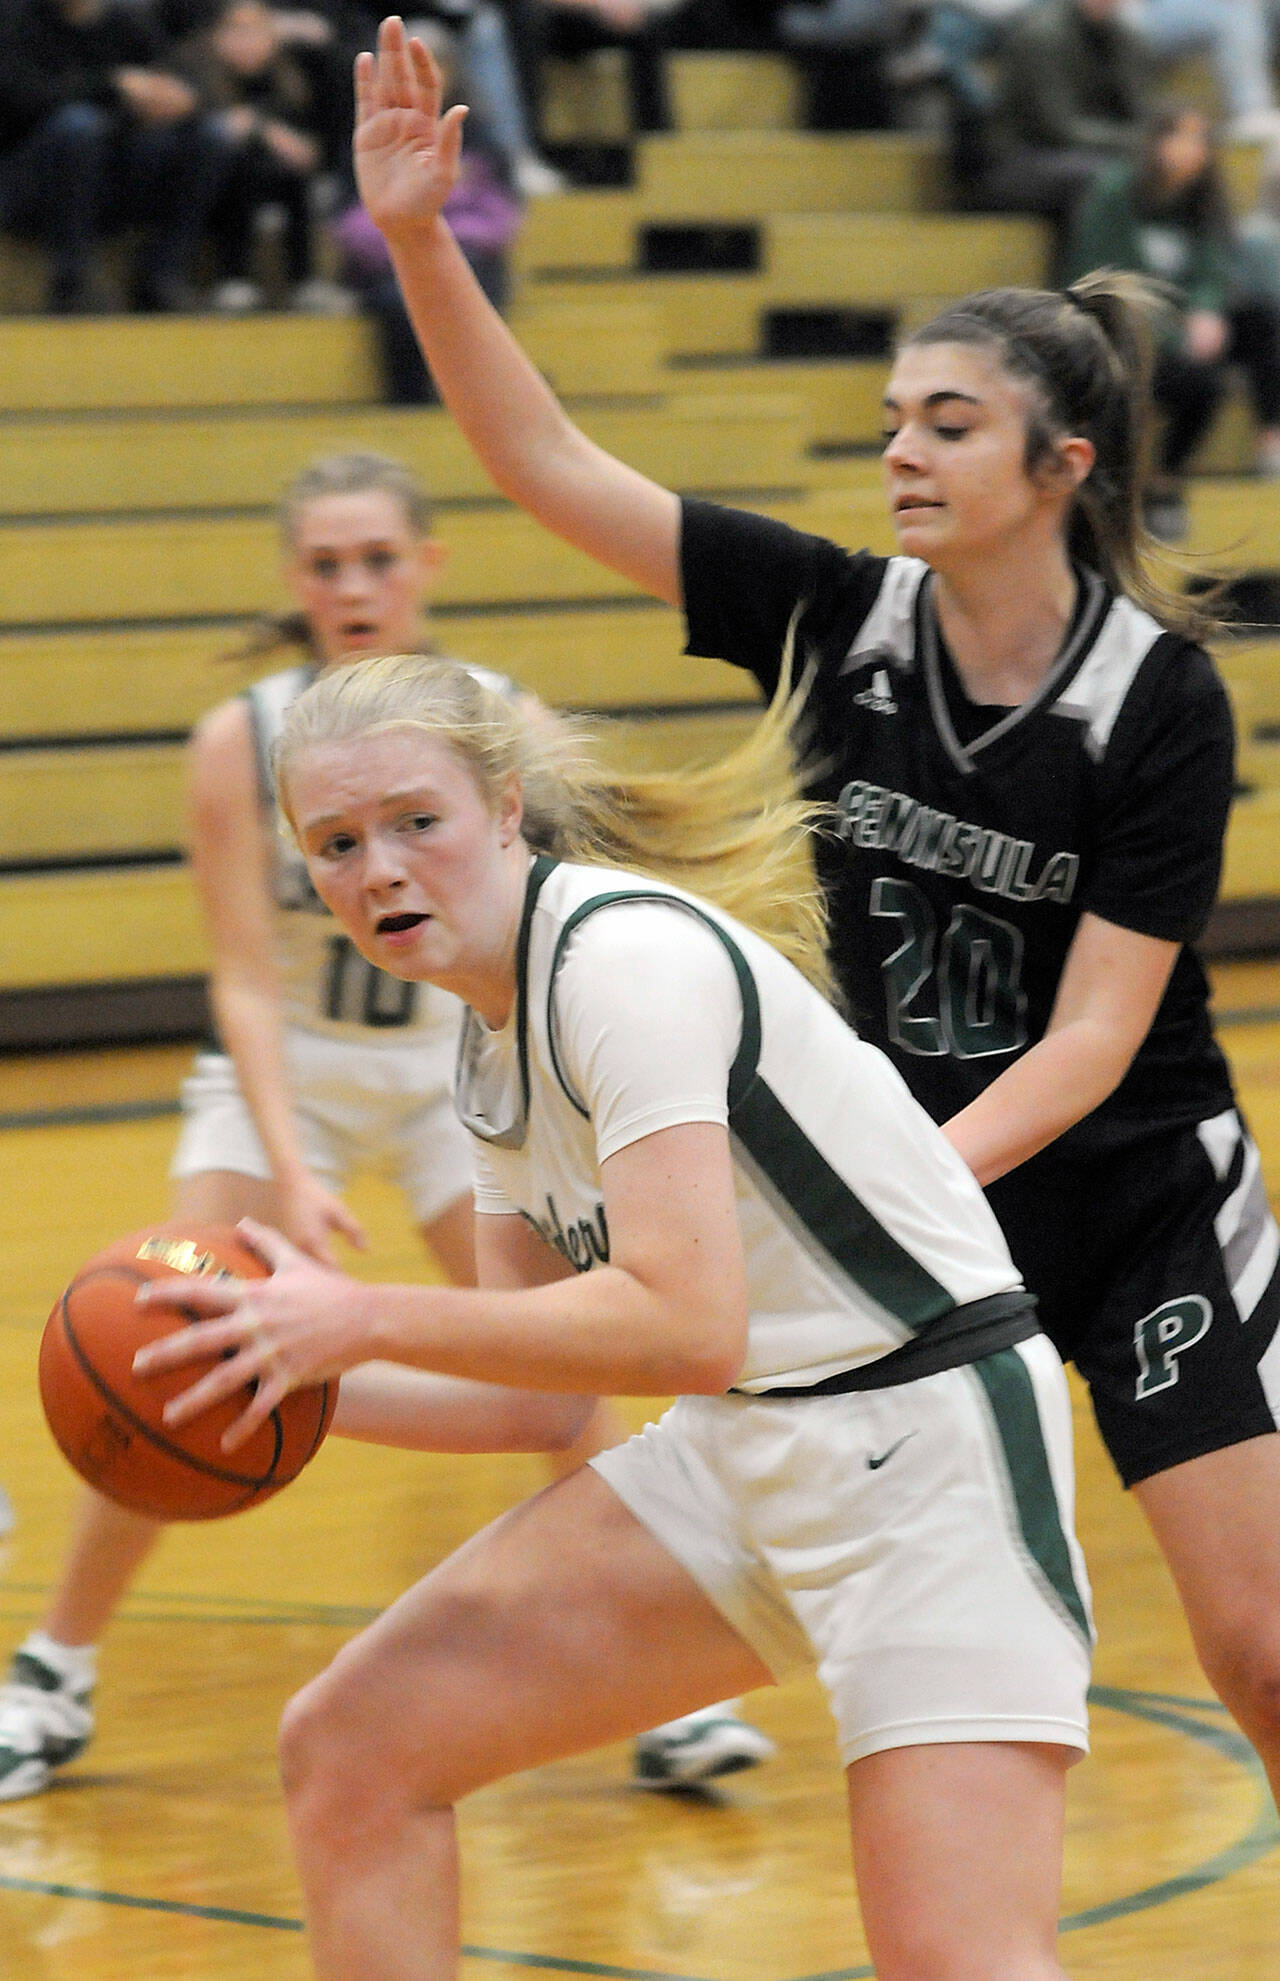 Port Angeles’s Paige Mason, front, looks for an out as Peninsula’s Ashley Edmonds closes in during Saturday’s game at Port Angeles High School. (Keith Thorpe/Peninsula Daily News)